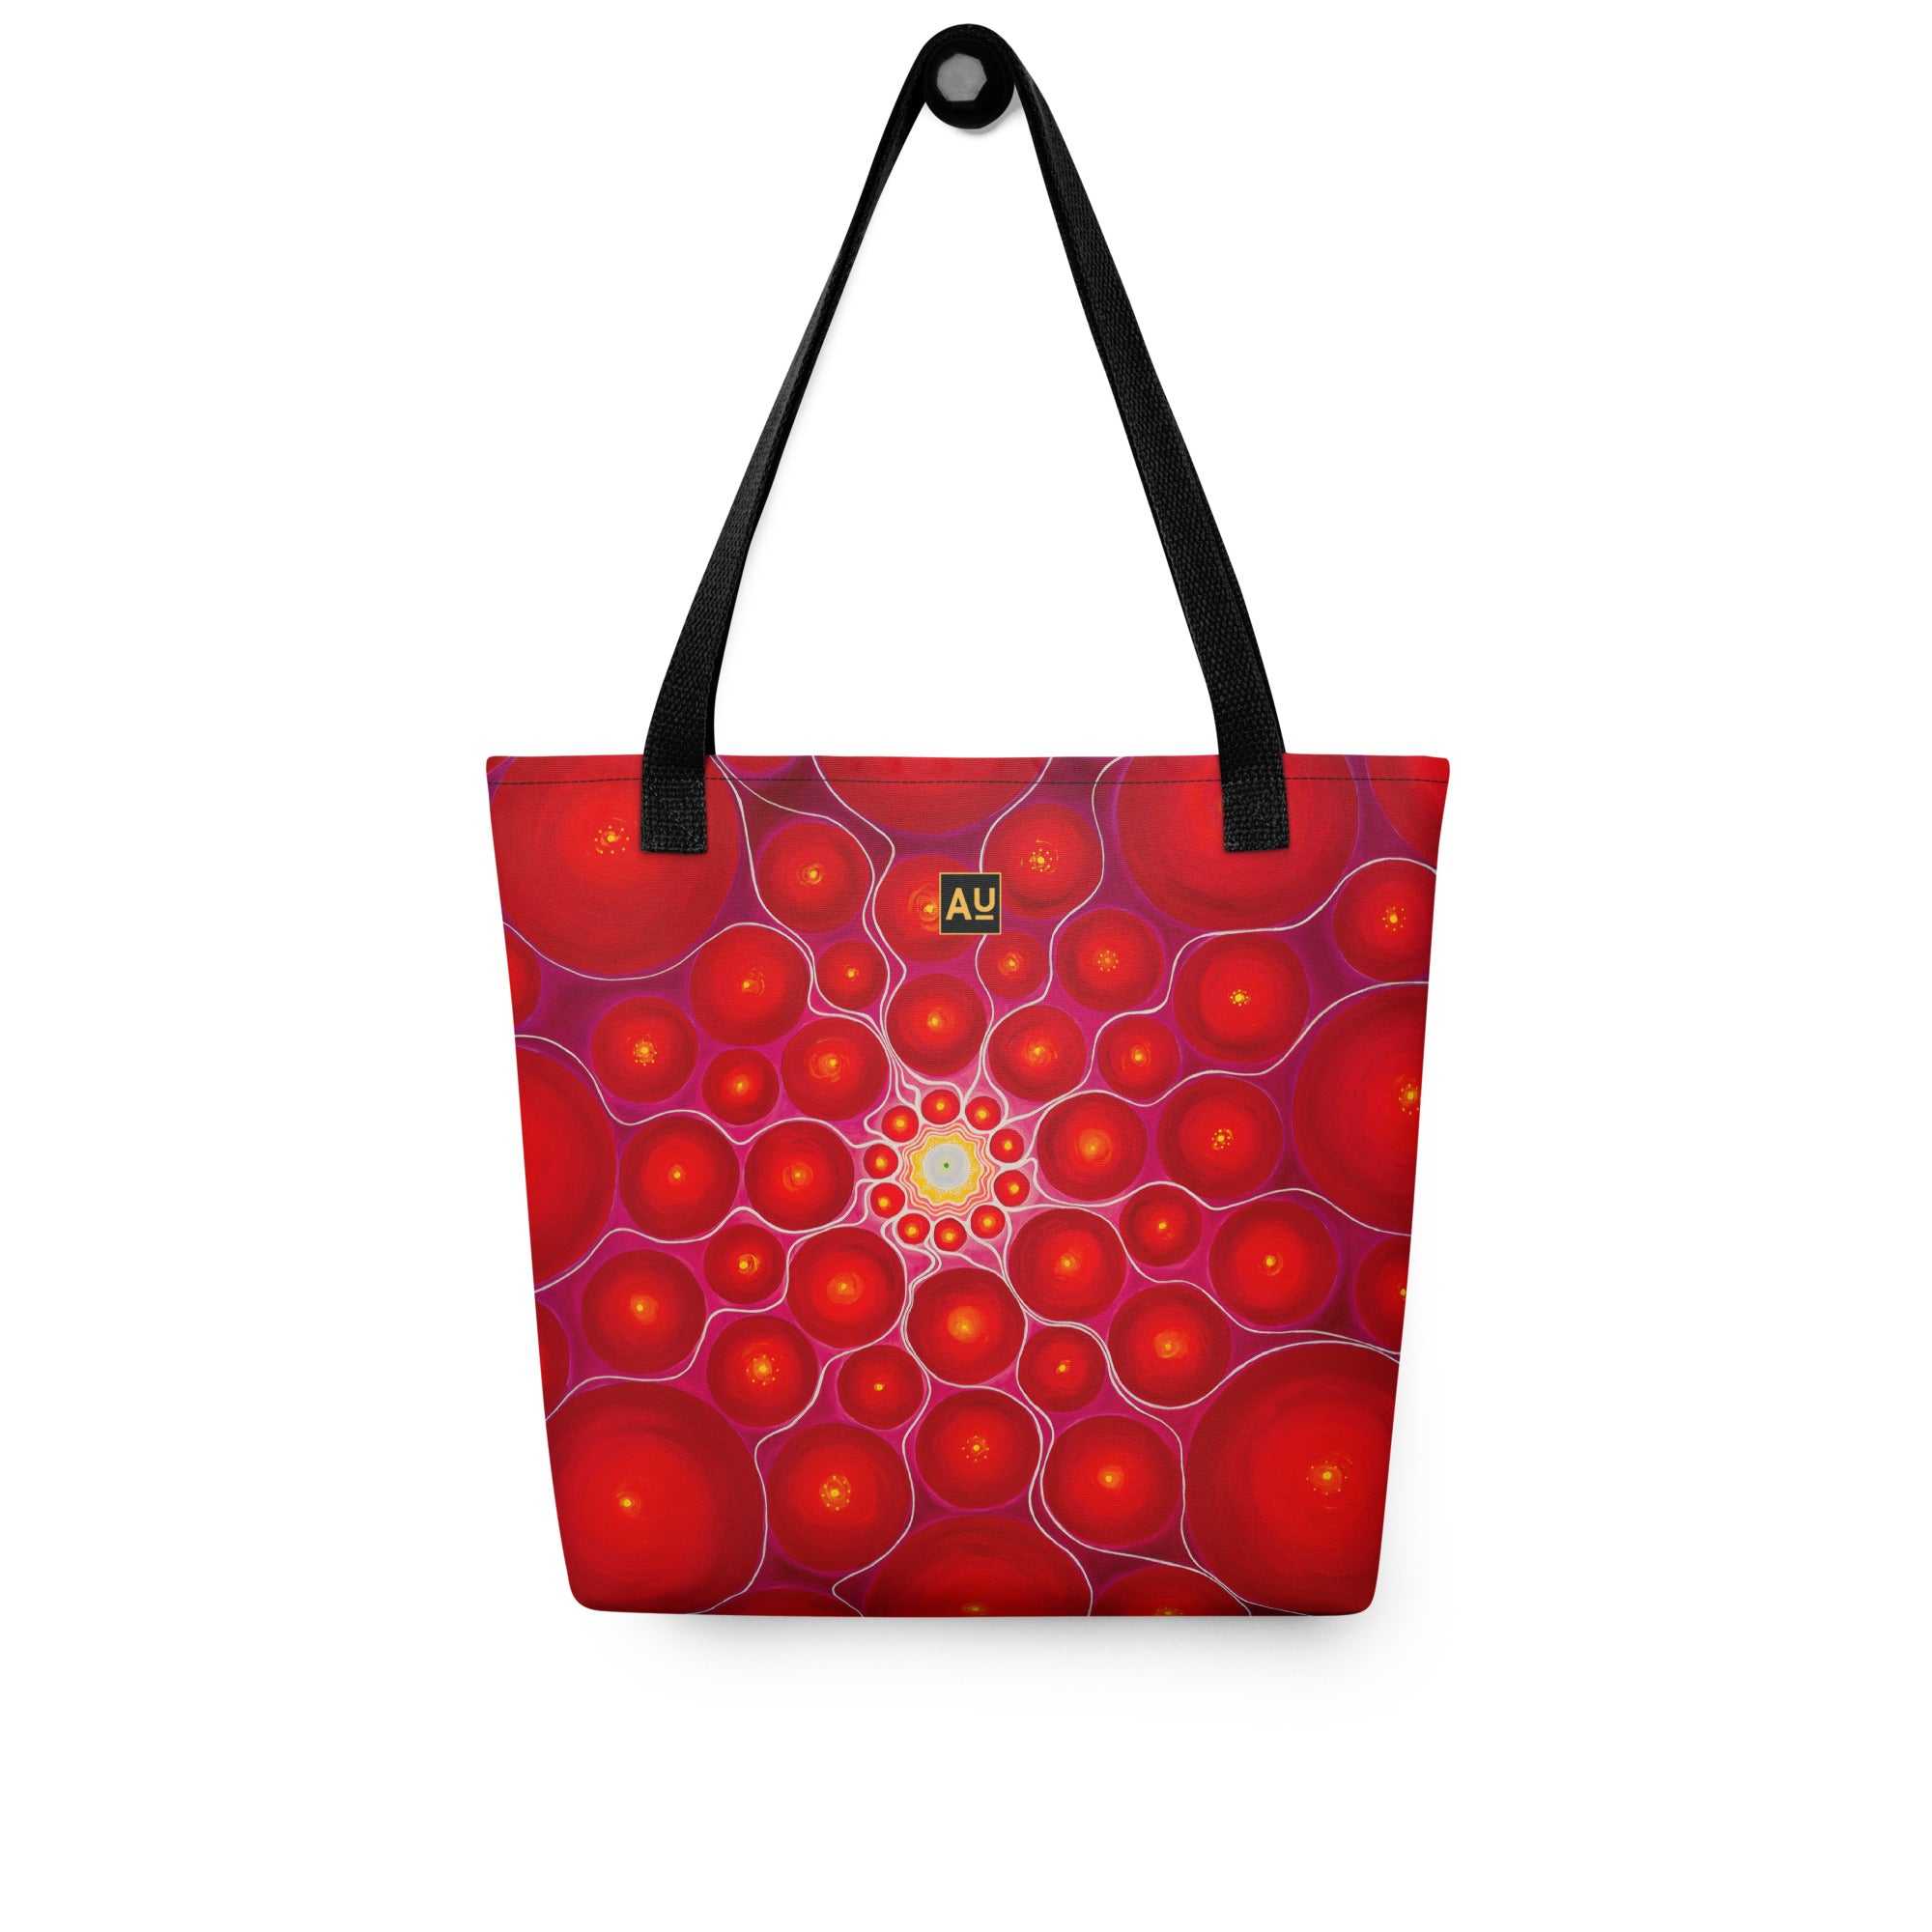 The Root Tote Bag